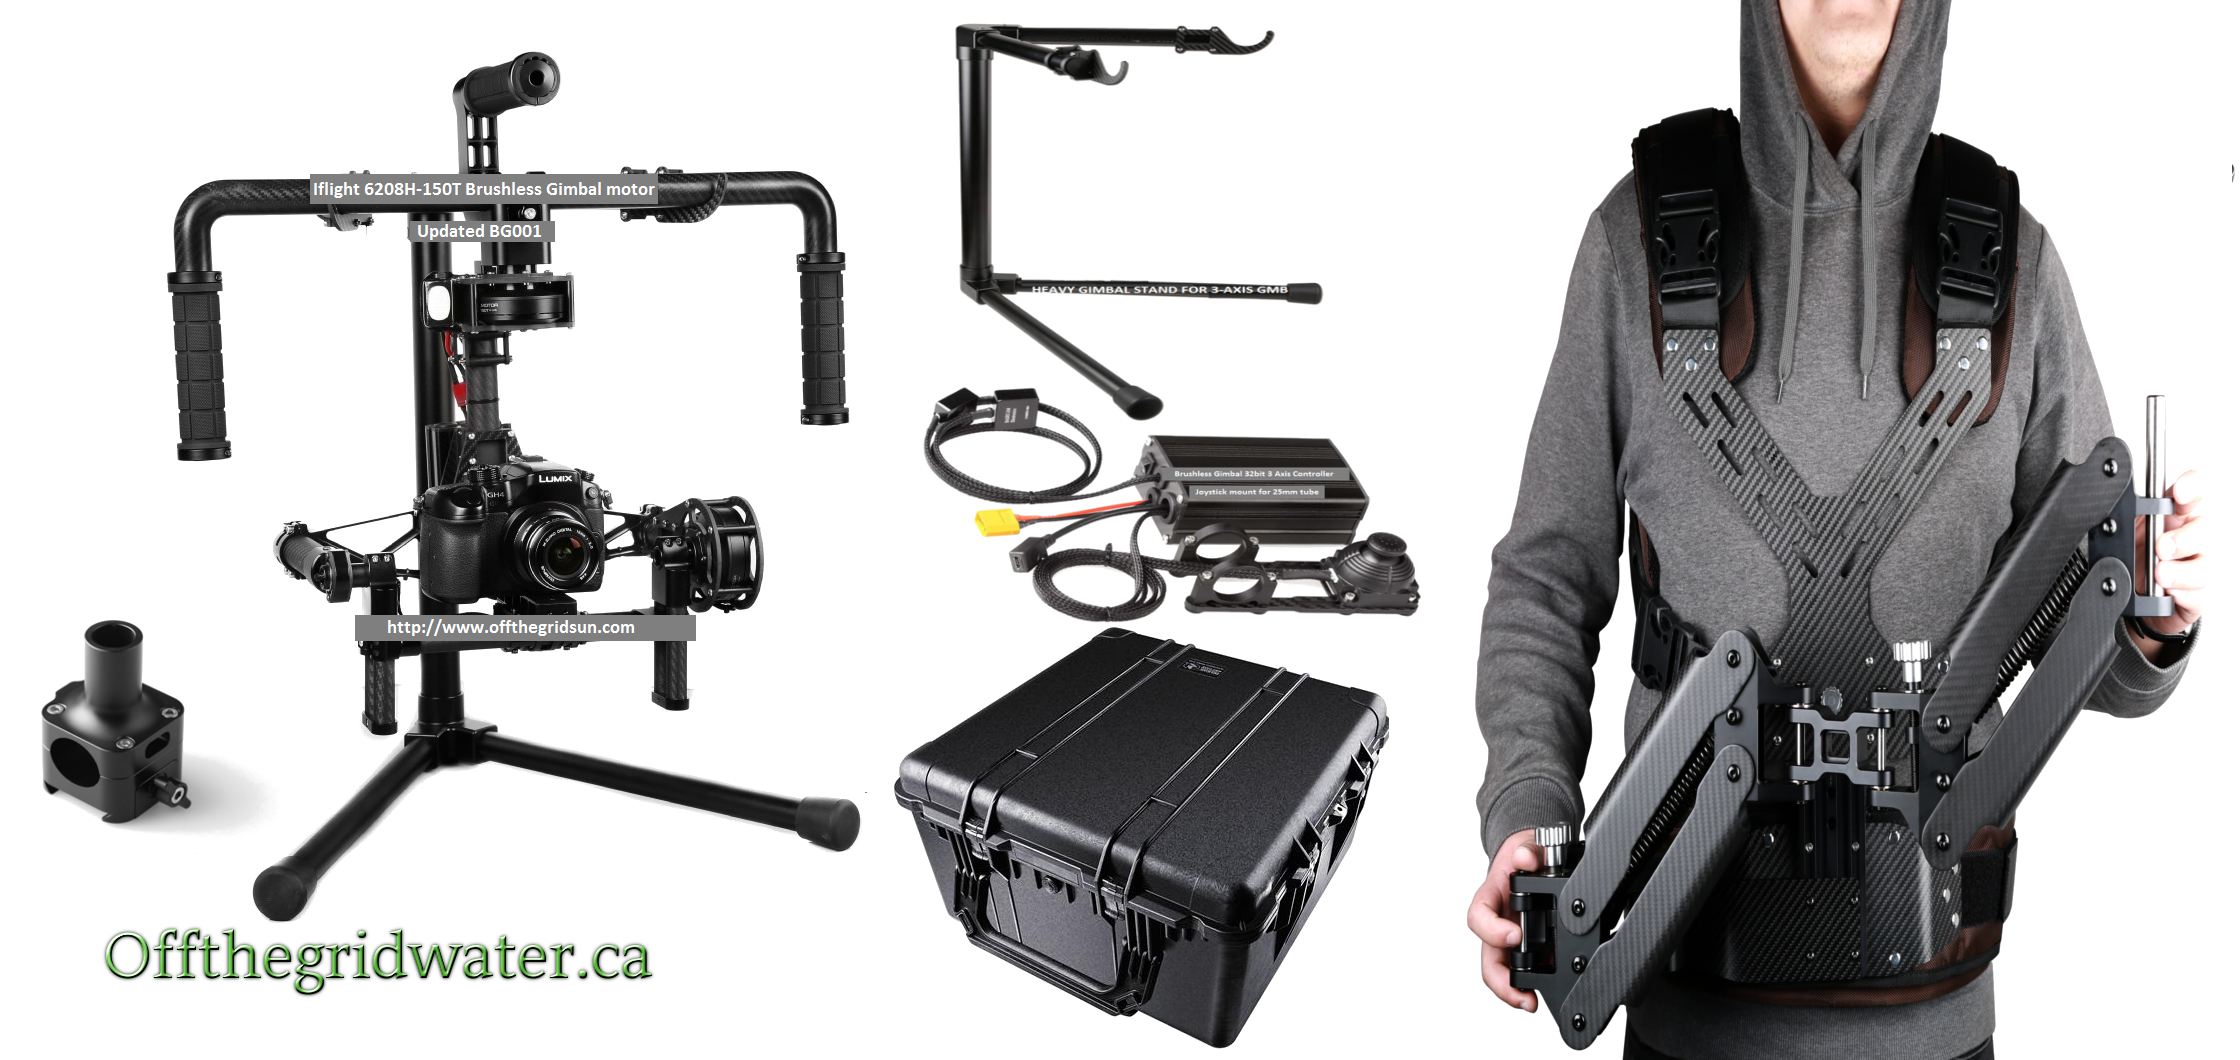 3 axis Gimbal system BGC Brushless with Steady cam Vest & case